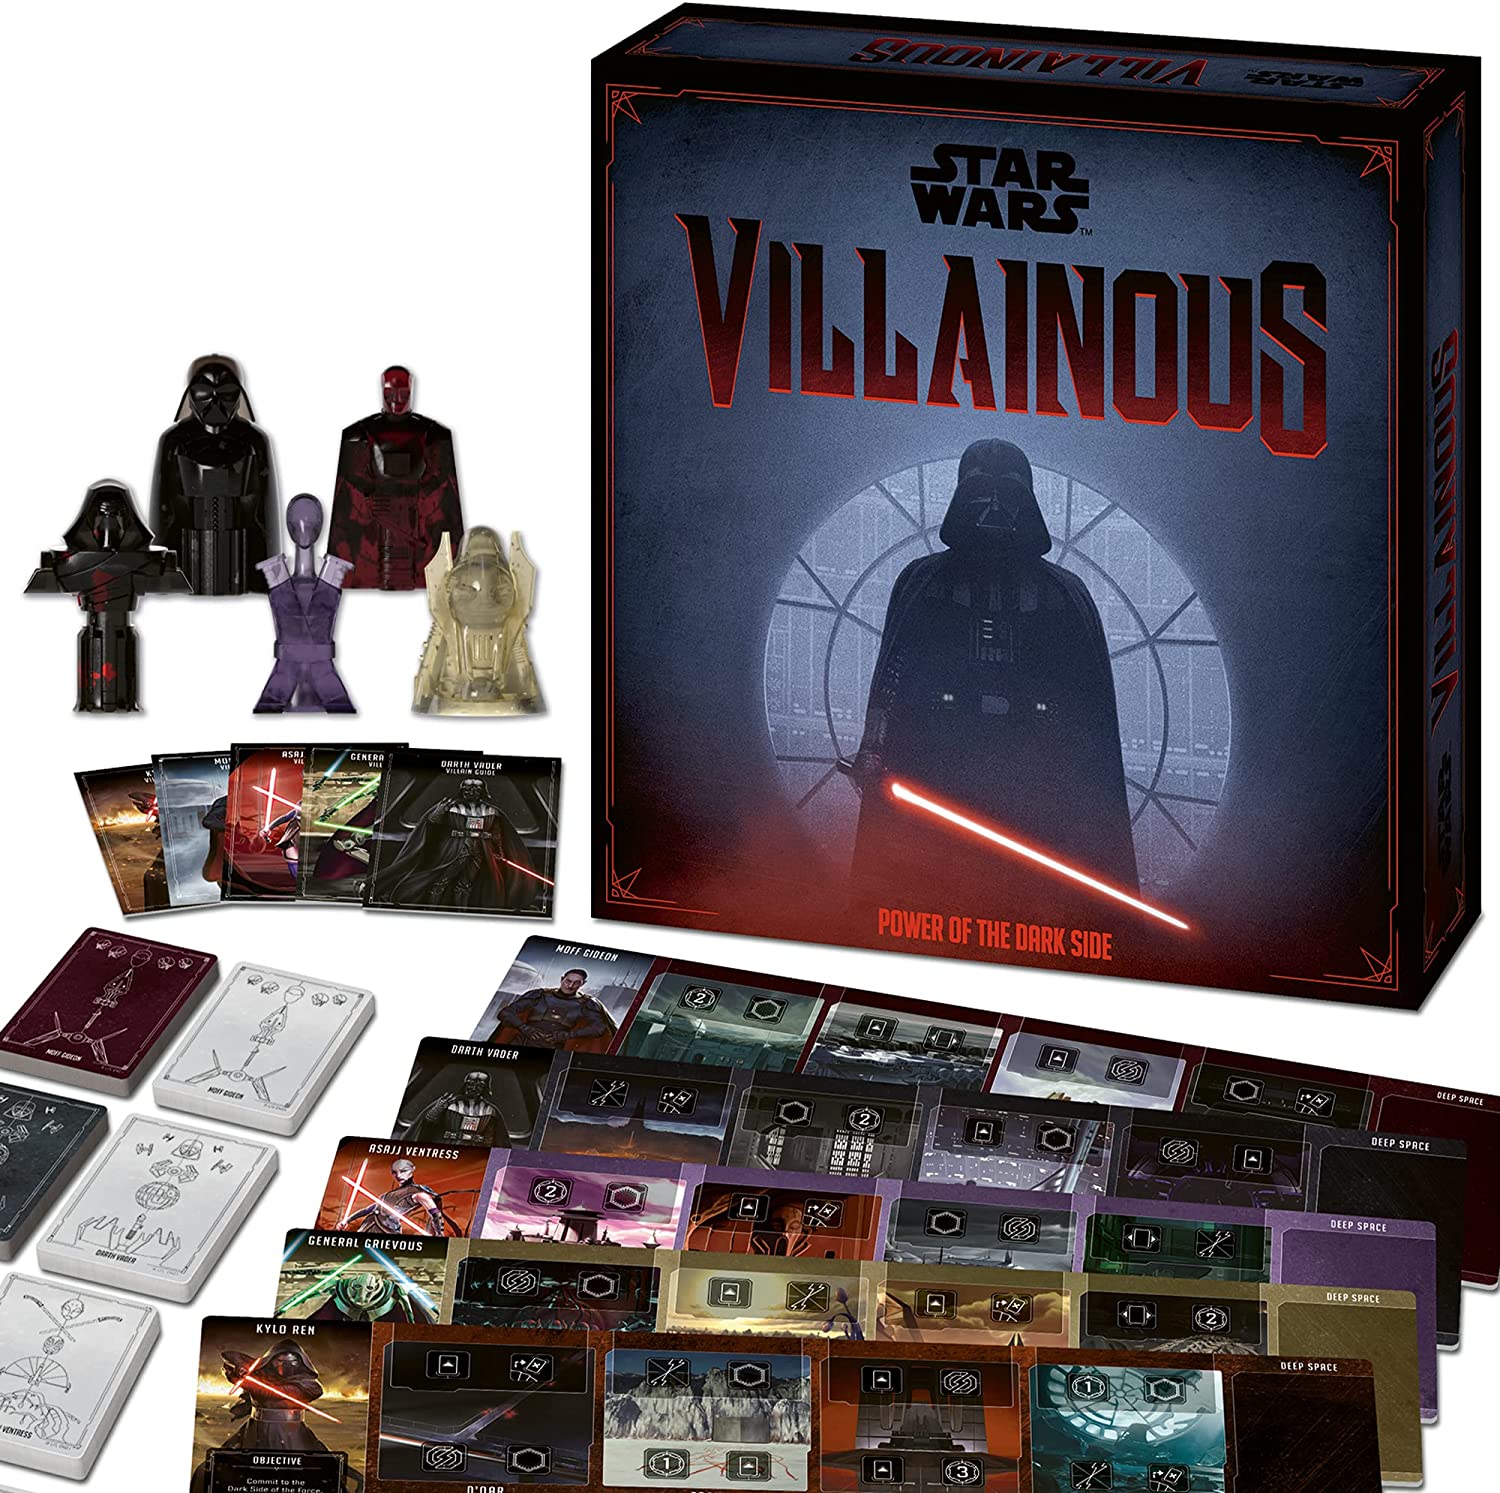 Ravensburger Star Wars Villainous: Power of The Dark Side Strategy Board Game $31.59 + Free Shipping